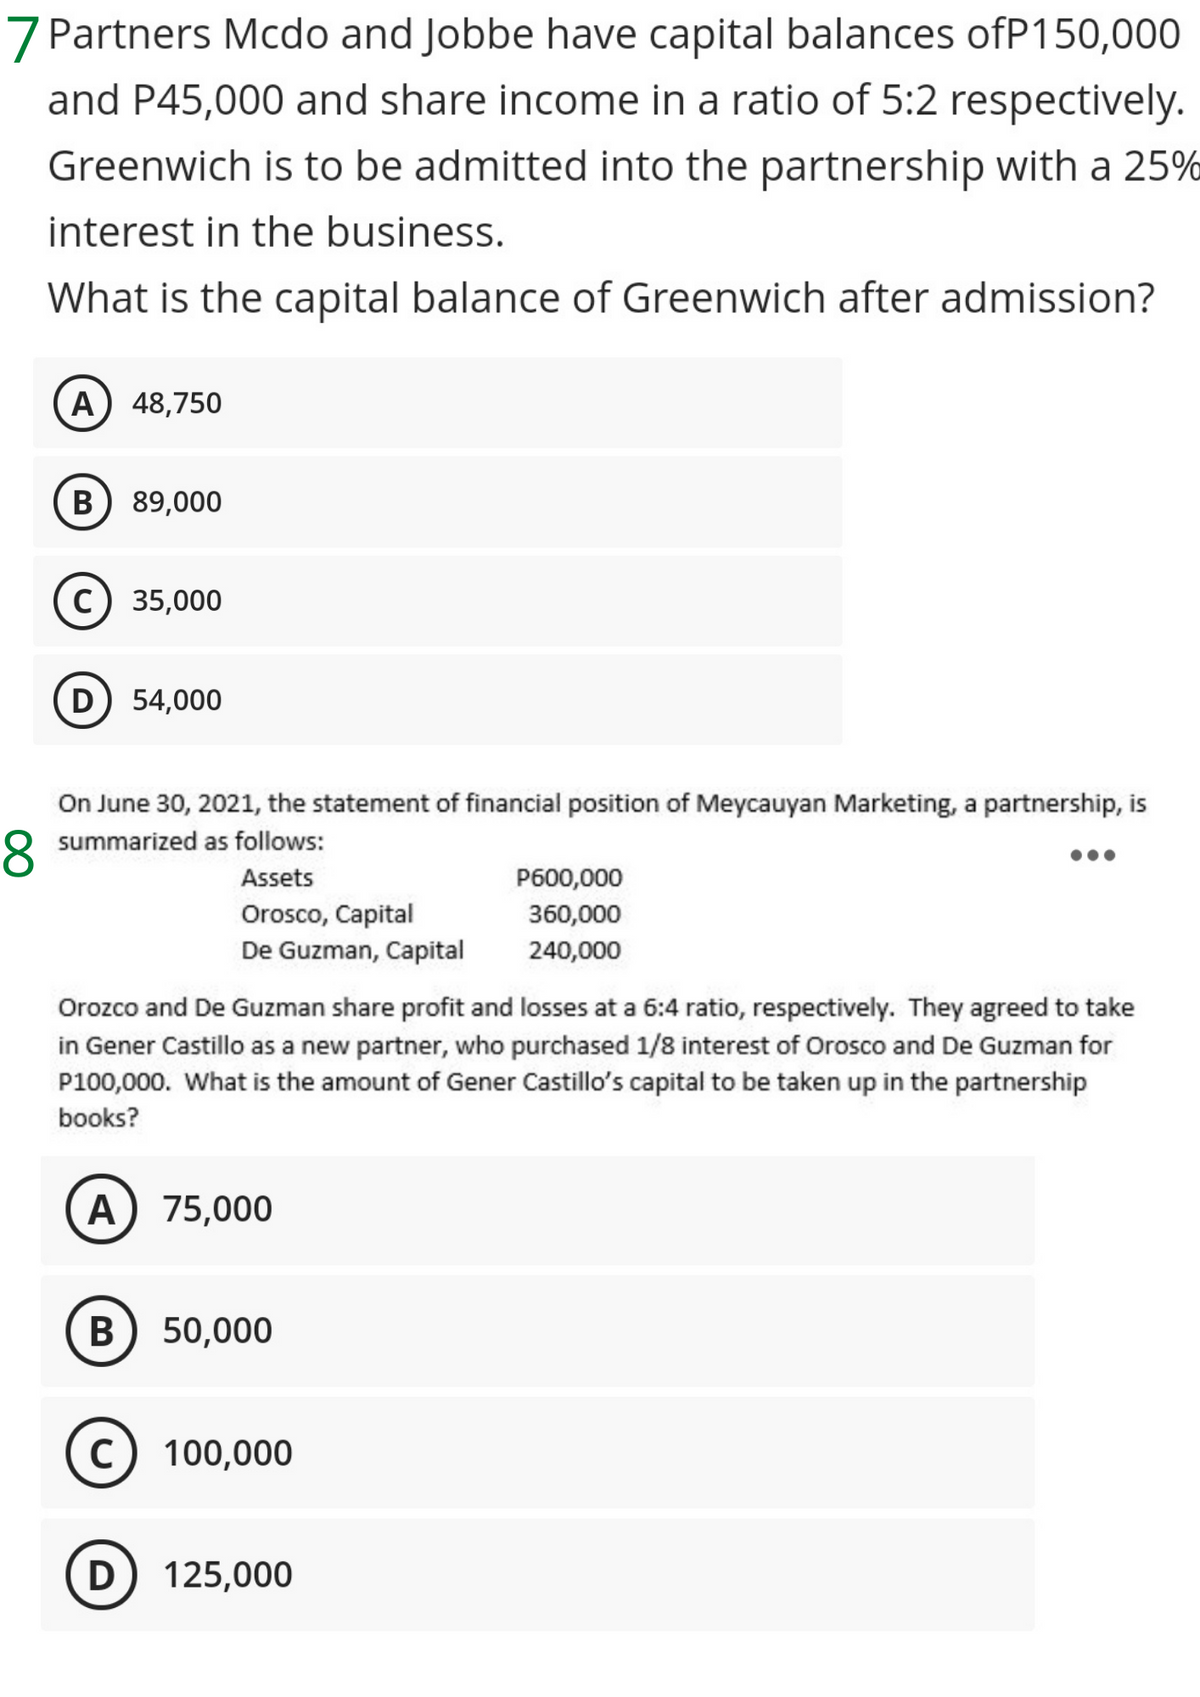 7 Partners Mcdo and Jobbe have capital balances ofP150,000
and P45,000 and share income in a ratio of 5:2 respectively.
Greenwich is to be admitted into the partnership with a 25%
interest in the business.
What is the capital balance of Greenwich after admission?
A) 48,750
B) 89,000
35,000
54,000
On June 30, 2021, the statement of financial position of Meycauyan Marketing, a partnership, is
8 summarized as follows:
Assets
P600,000
Orosco, Capital
De Guzman, Capital
360,000
240,000
Orozco and De Guzman share profit and losses at a 6:4 ratio, respectively. They agreed to take
in Gener Castillo as a new partner, who purchased 1/8 interest of Orosco and De Guzman for
P100,000. What is the amount of Gener Castillo's capital to be taken up in the partnership
books?
A) 75,000
В
50,000
100,000
D
125,000
